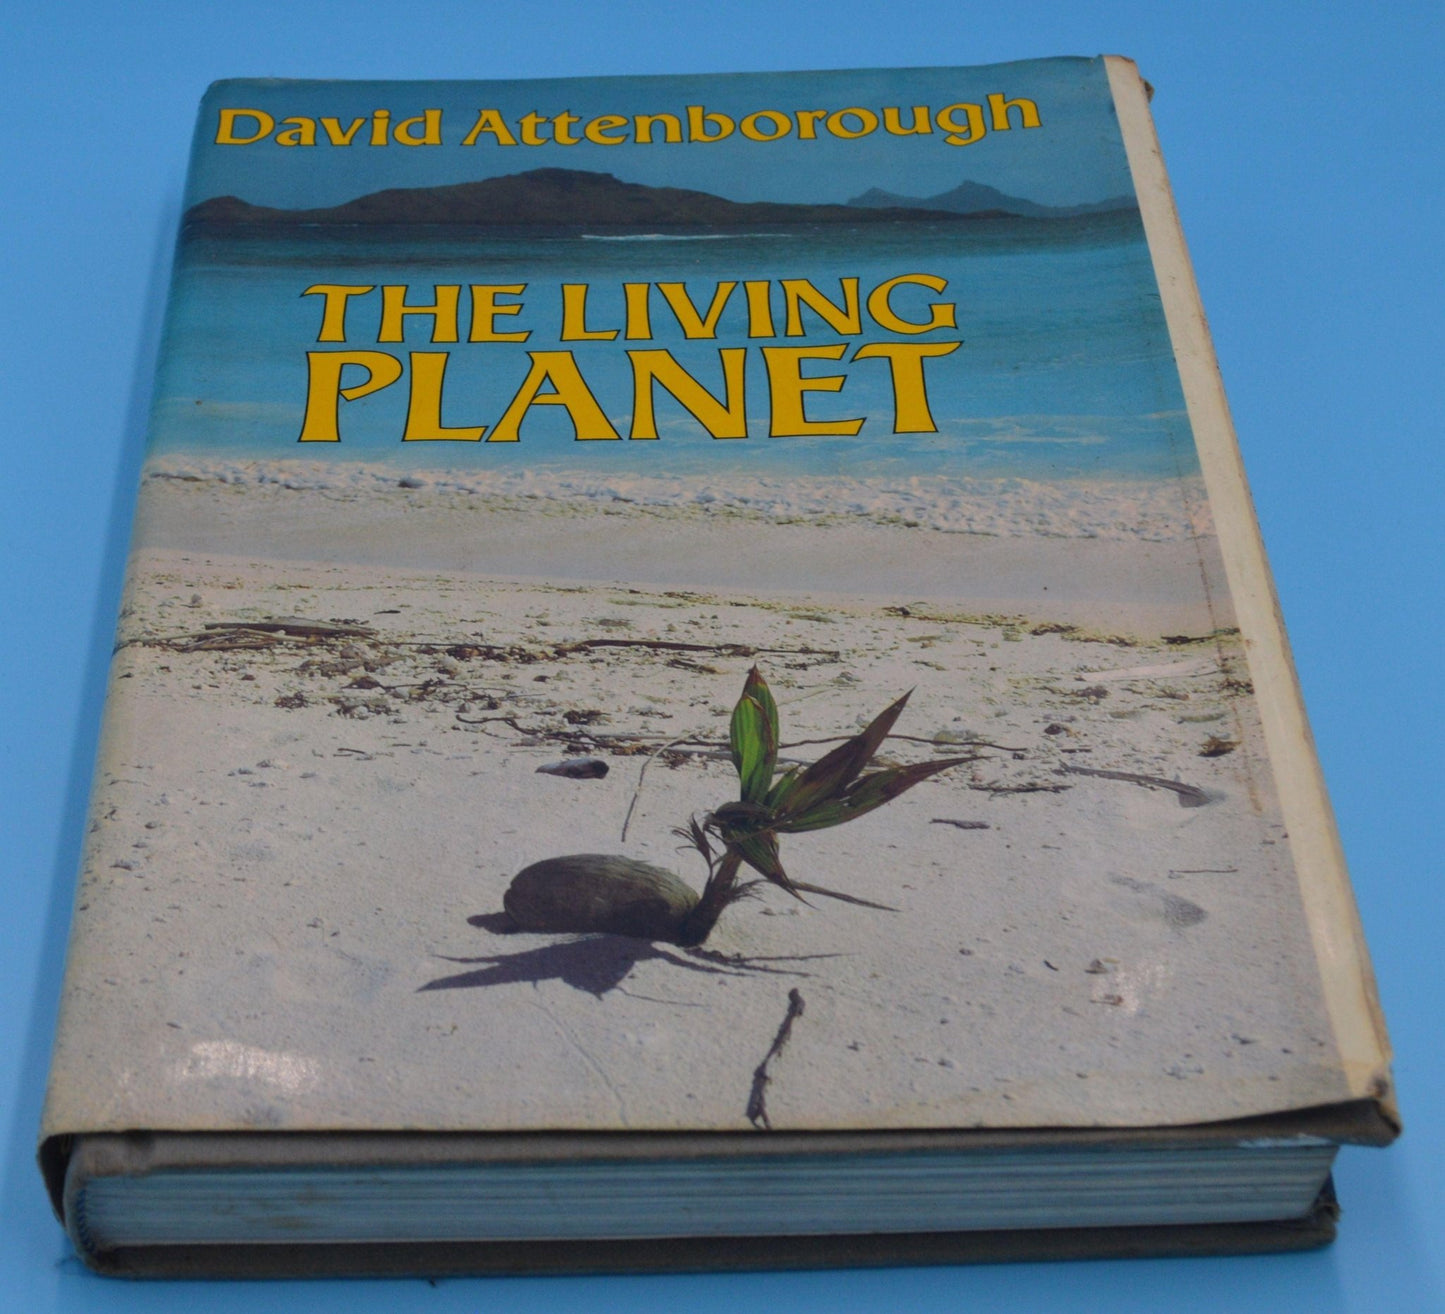 SECONDHAND BOOK THE LIVING PLANET DAVID ATTENBOROUGH - TMD167207